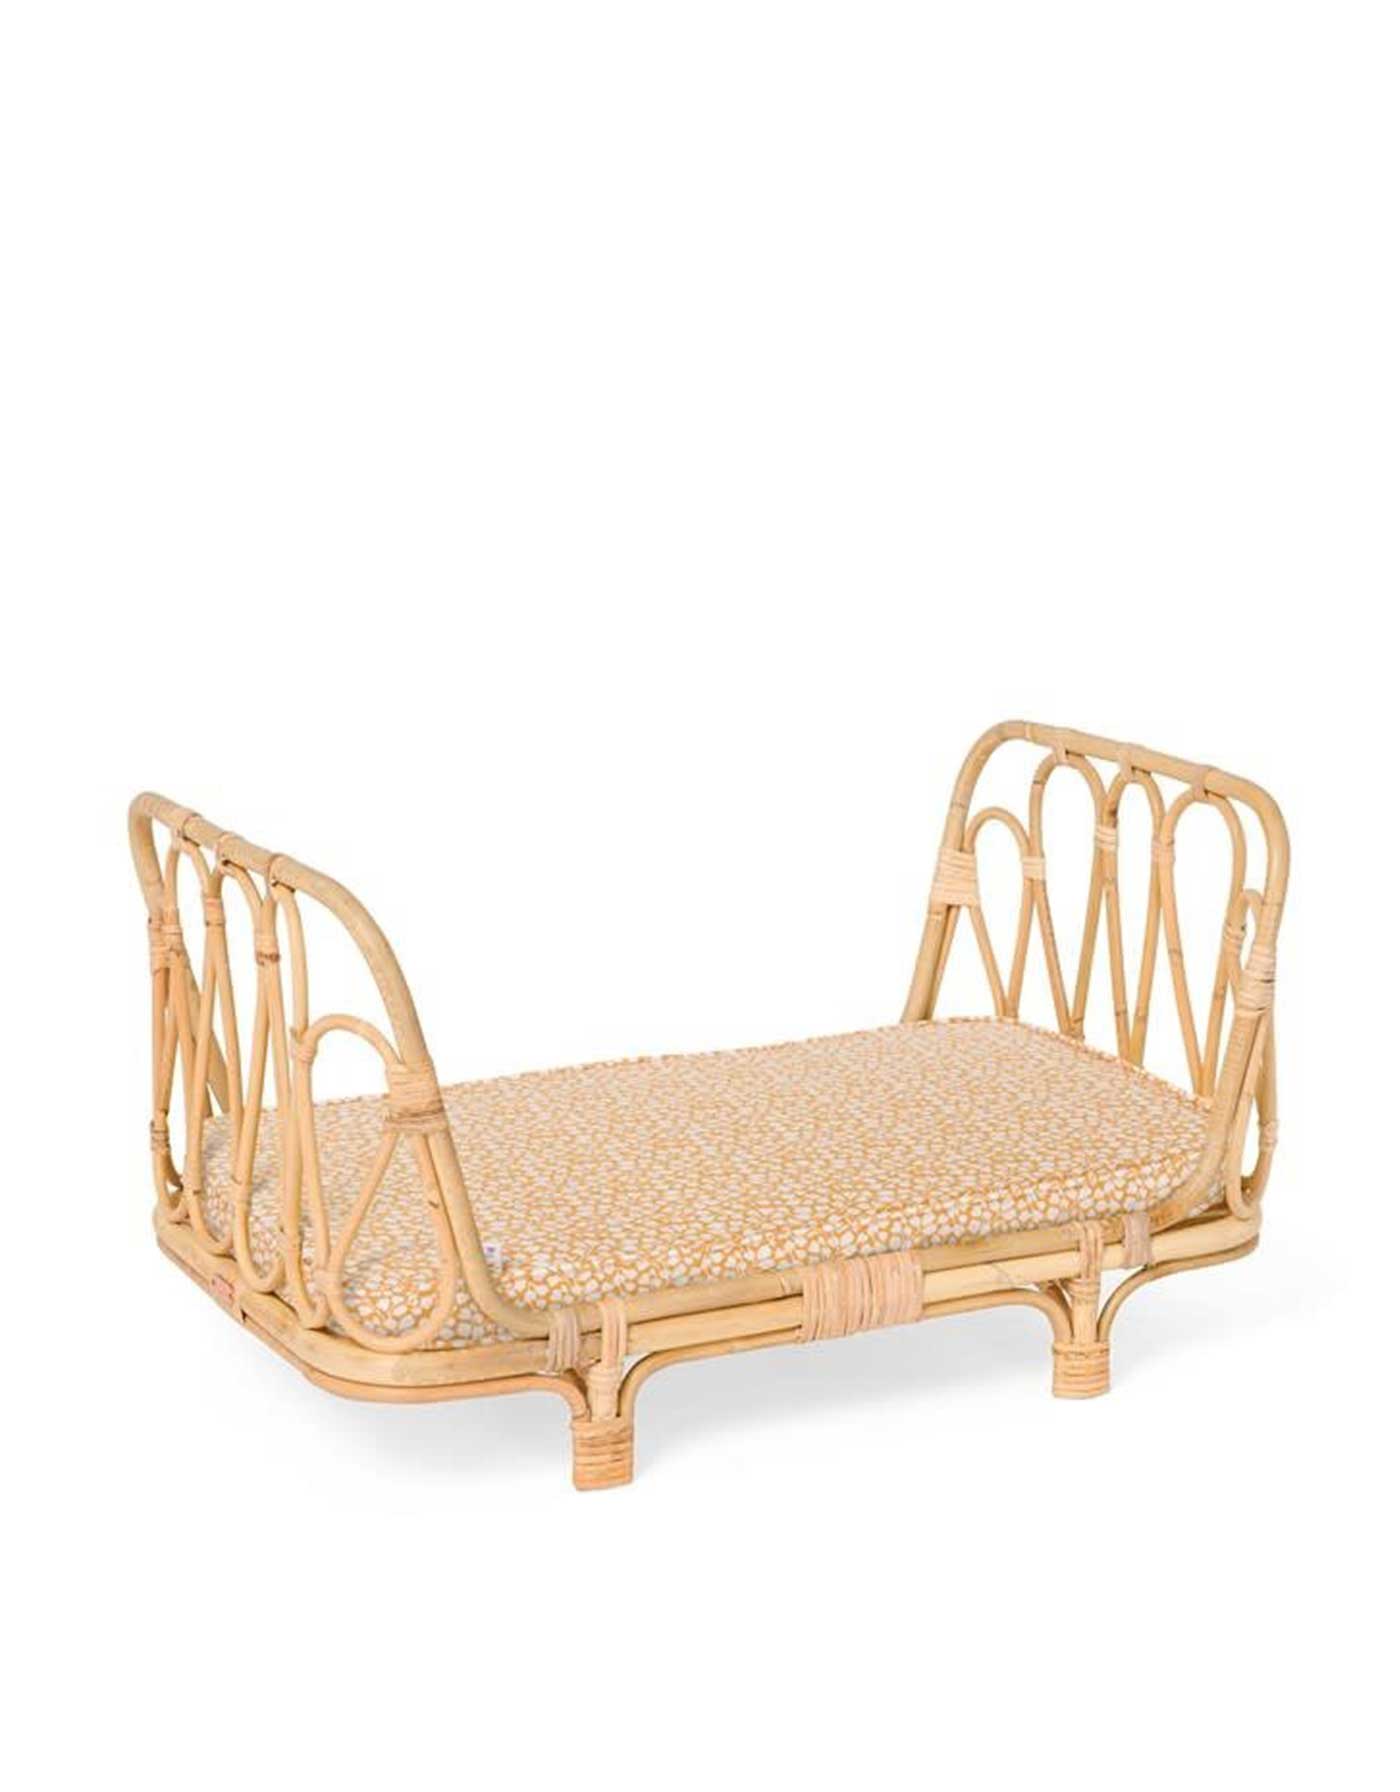 Rattan doll bed - Gold leaves - Poppie Toys